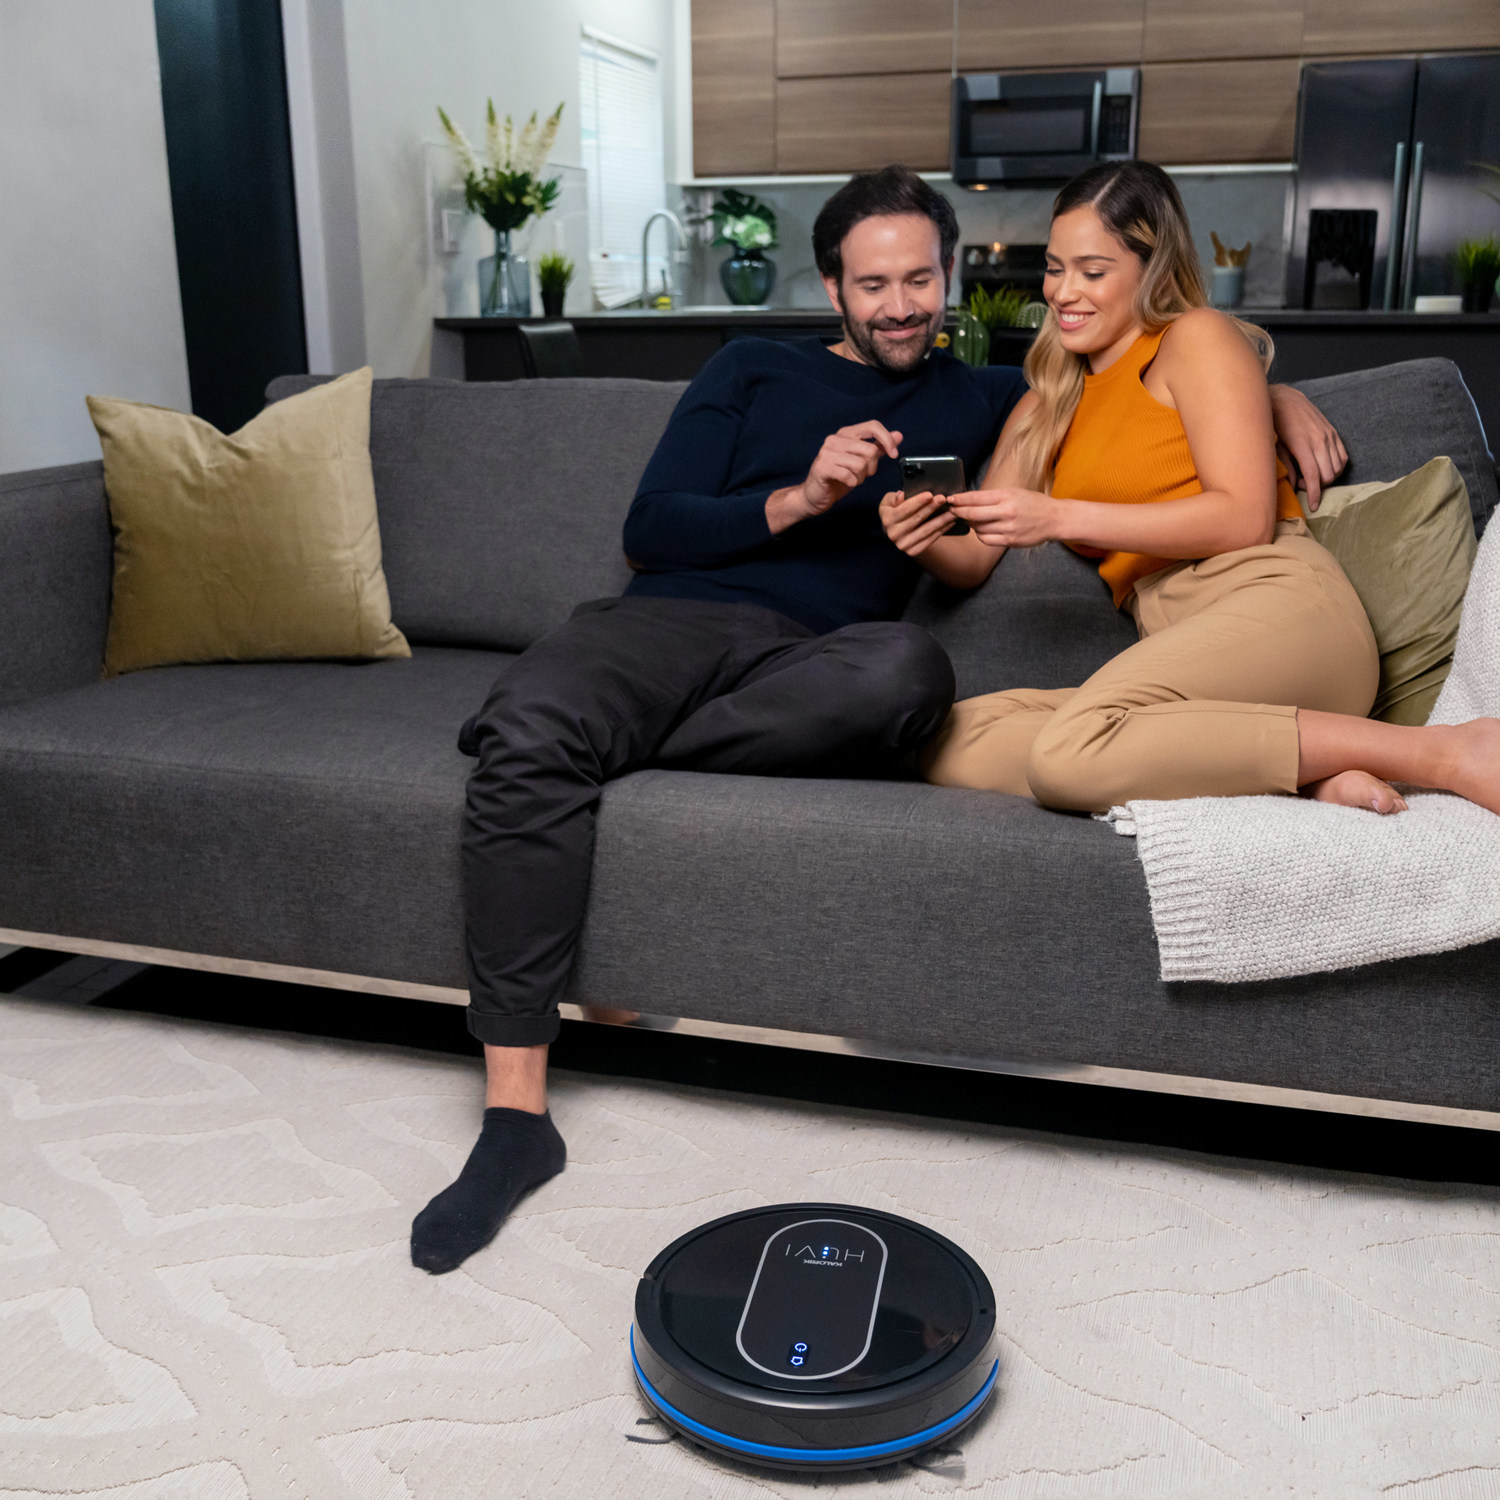 Kalorik's New Kind of Clean for Your Home: the HUVI R1 Robot Vacuum